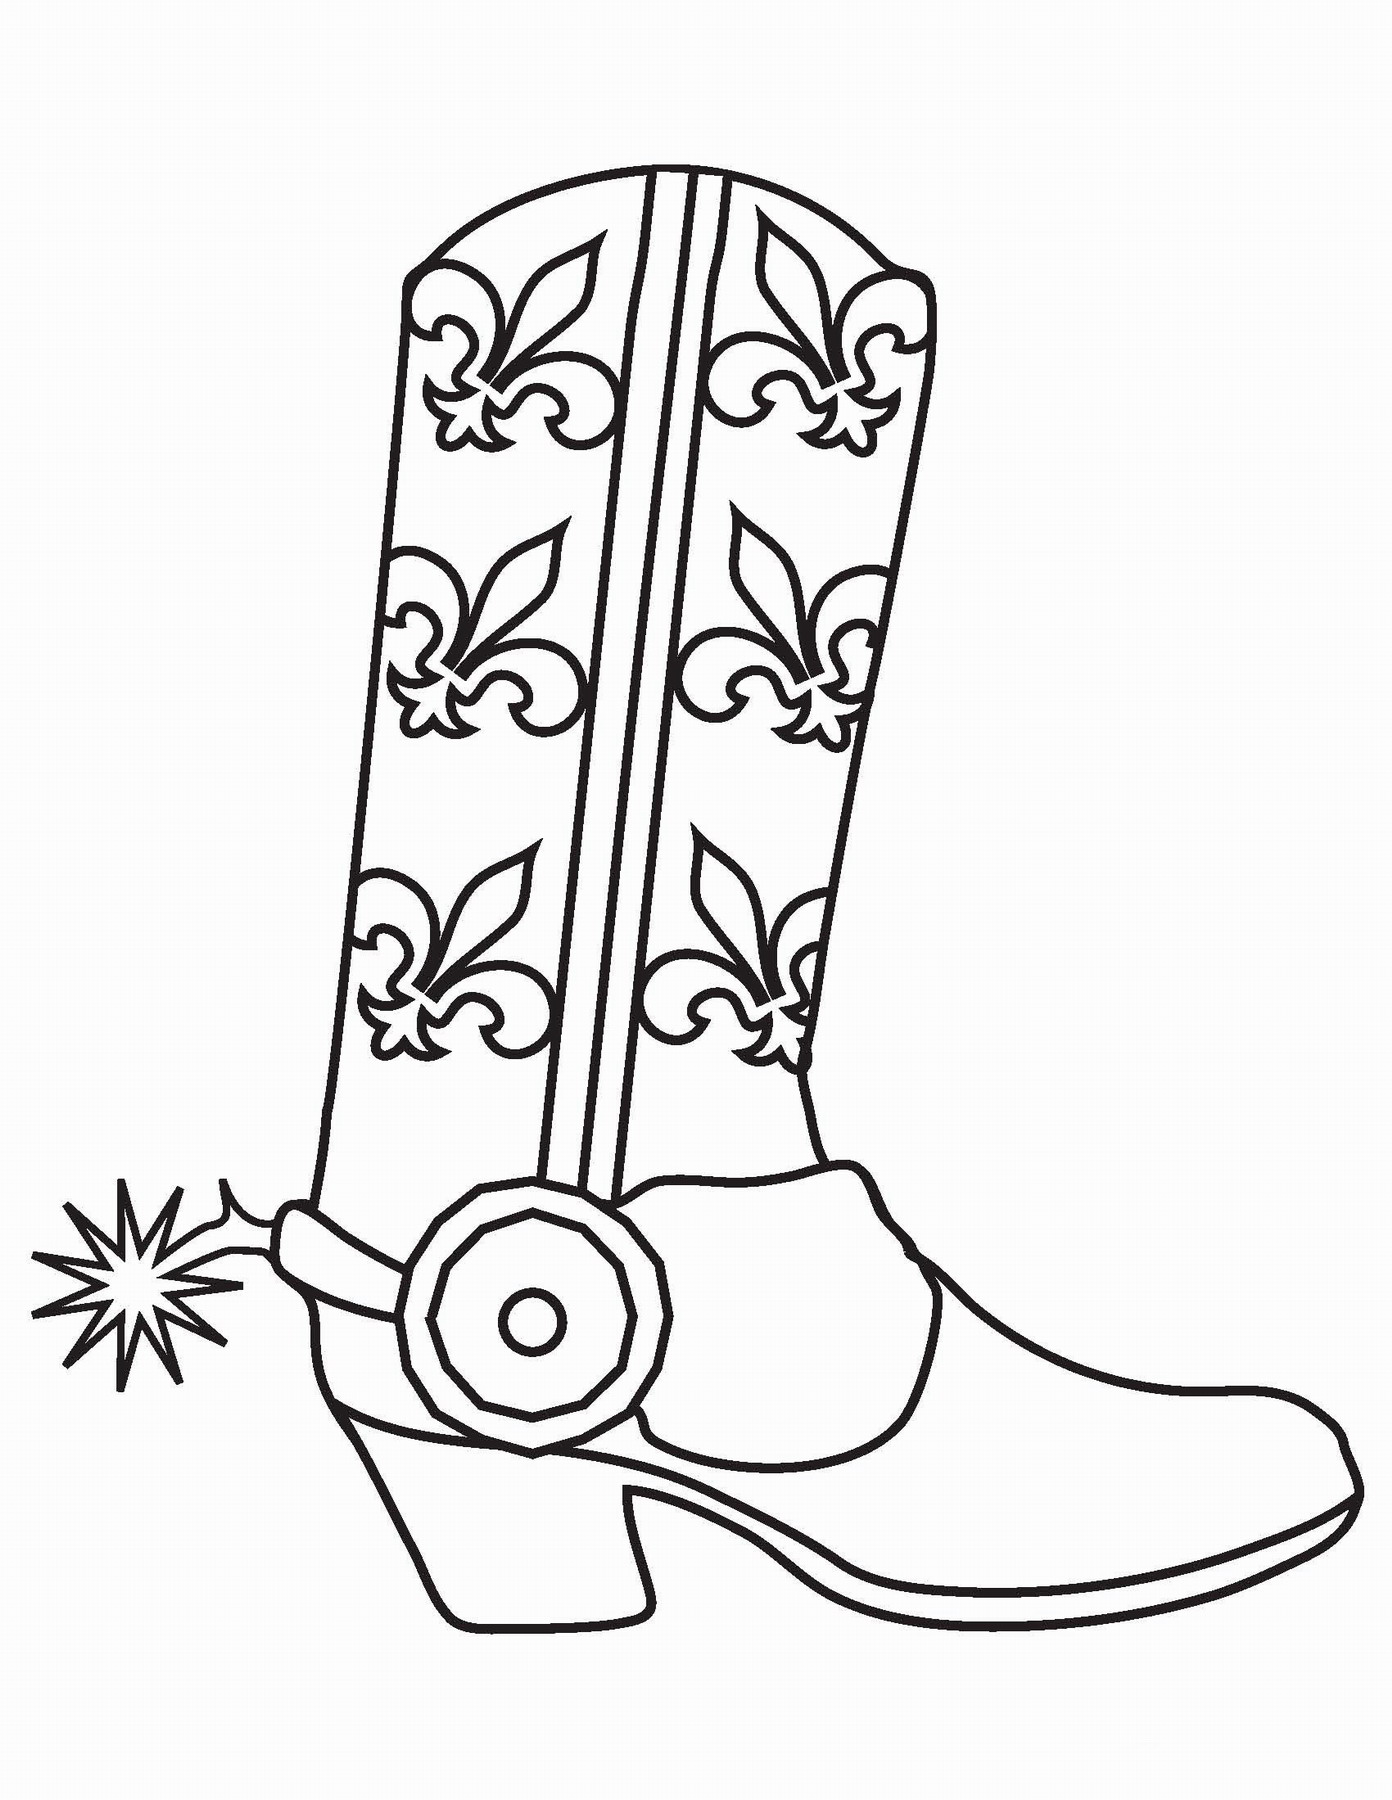 download-60-western-themed-coloring-sheets-coloring-pages-png-pdf-file